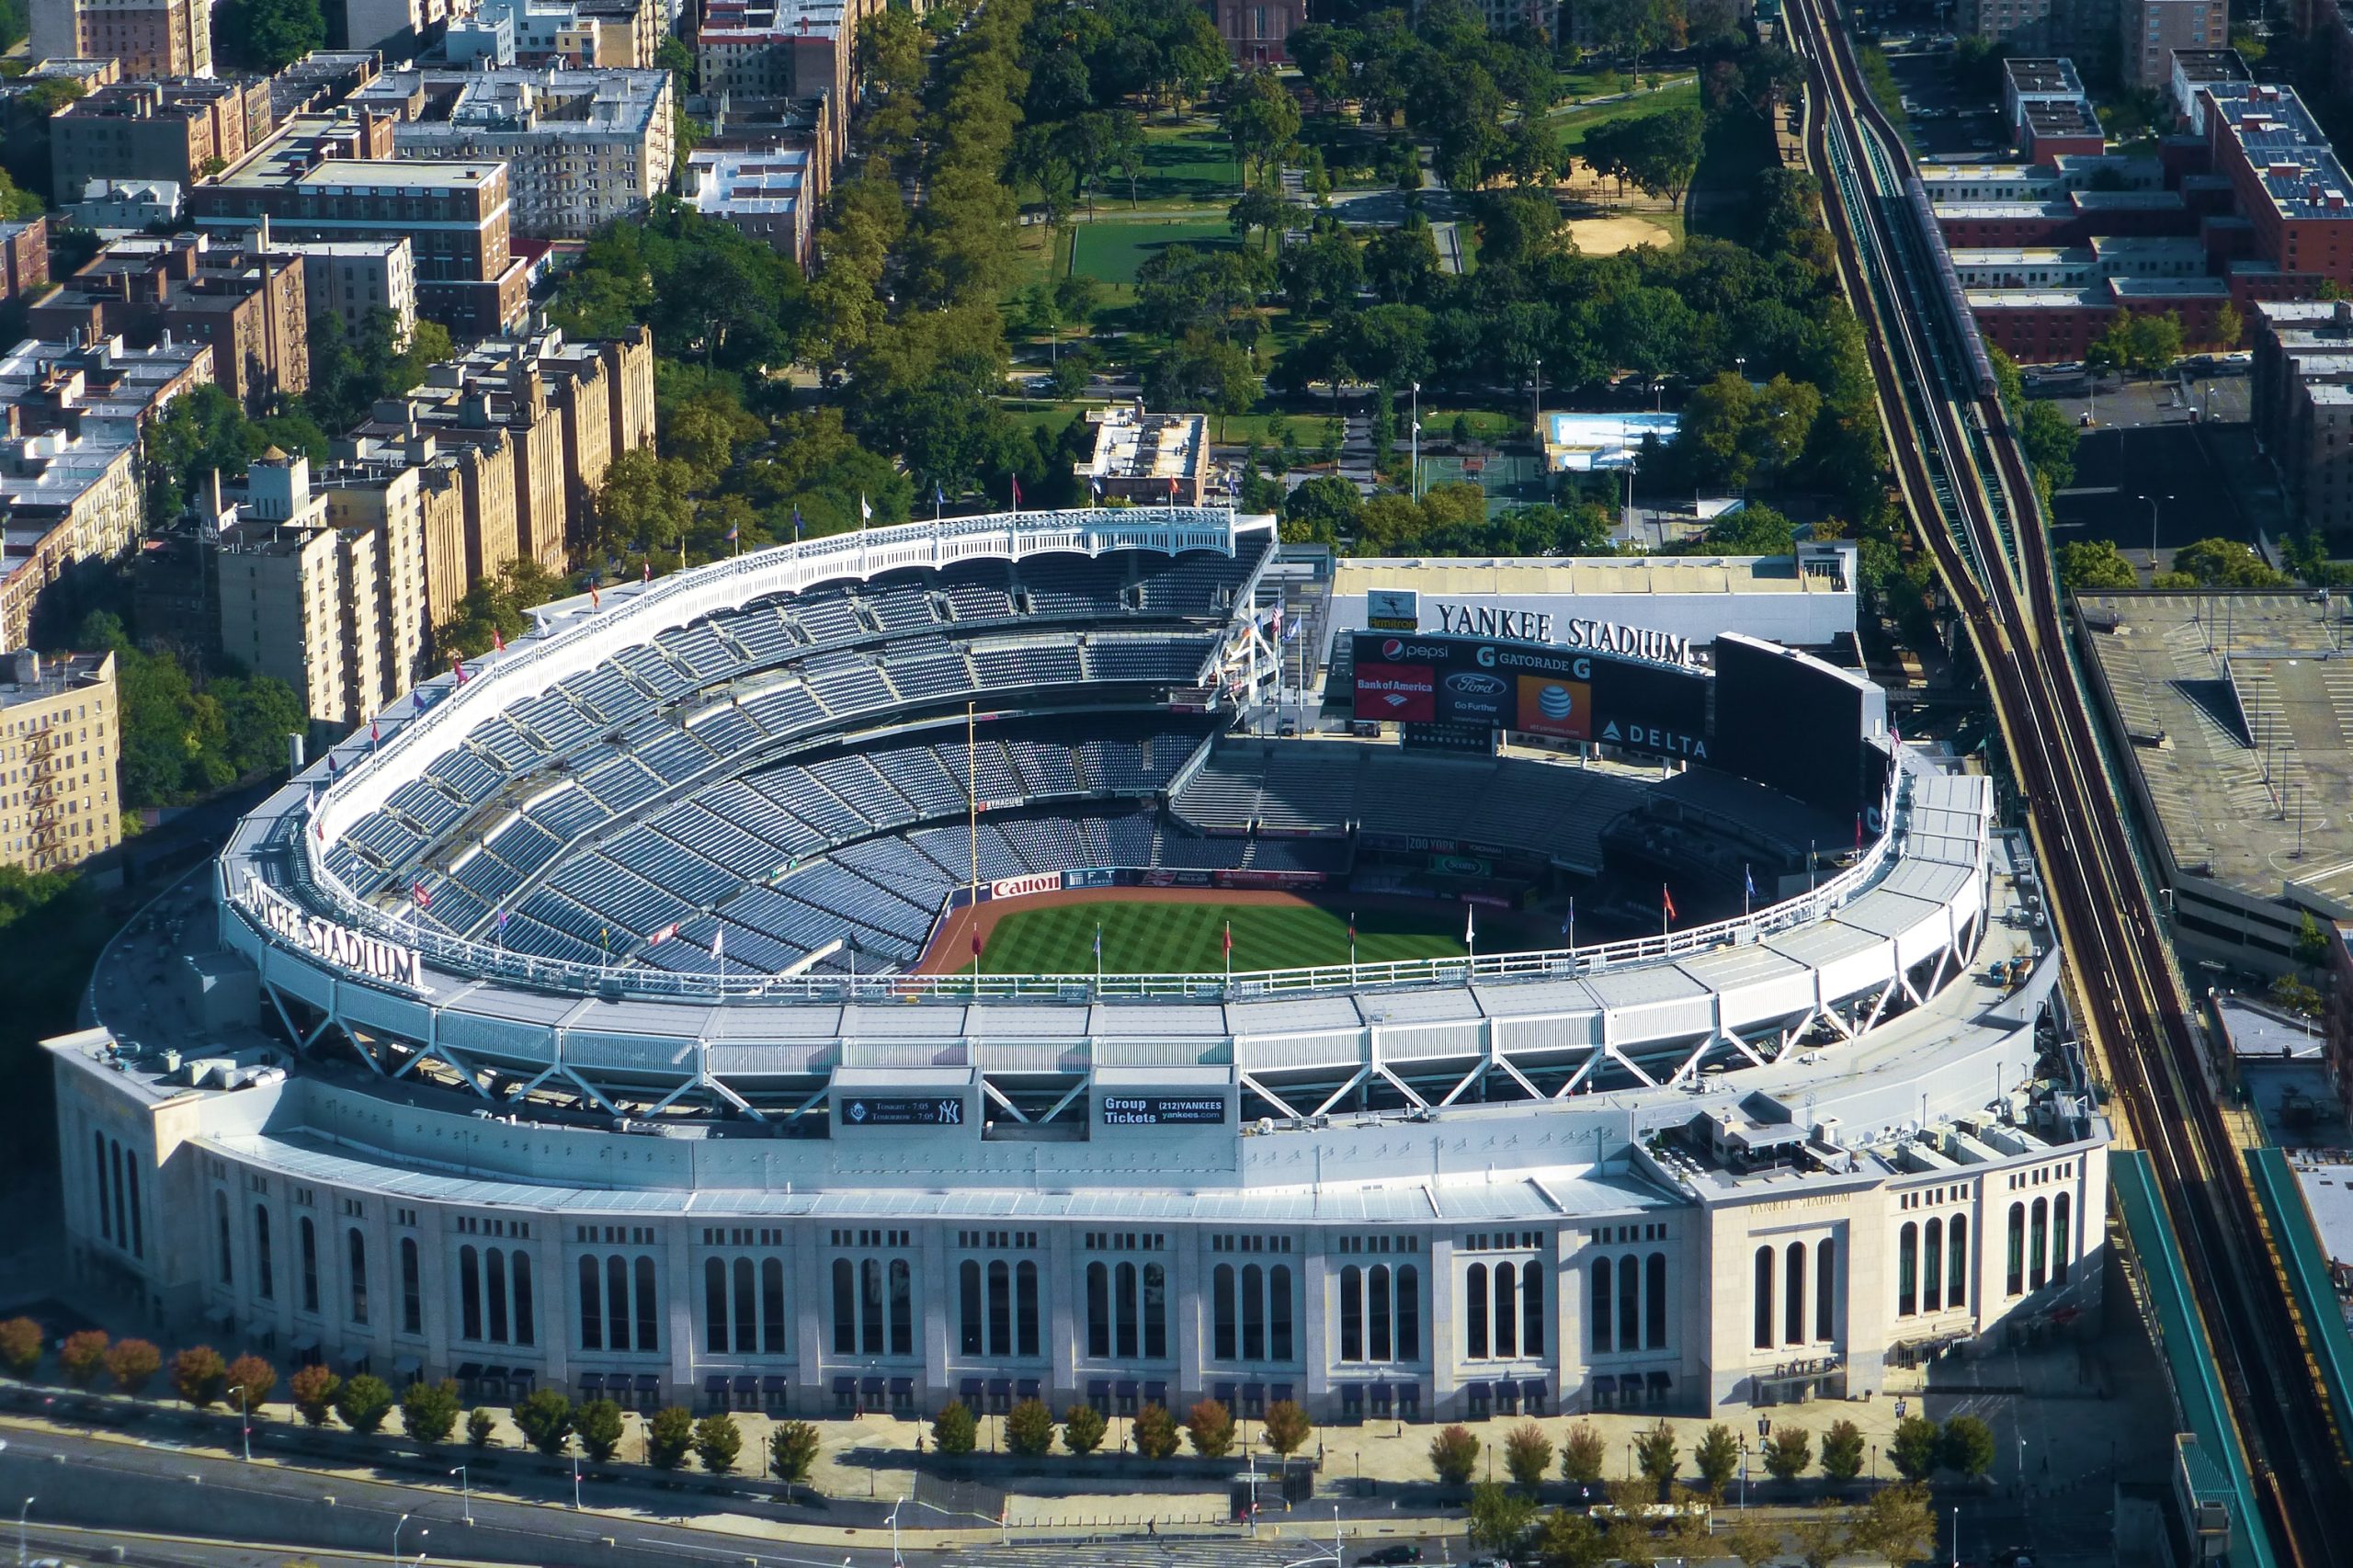 Arial photograph of Yankee Stadium in NYC.